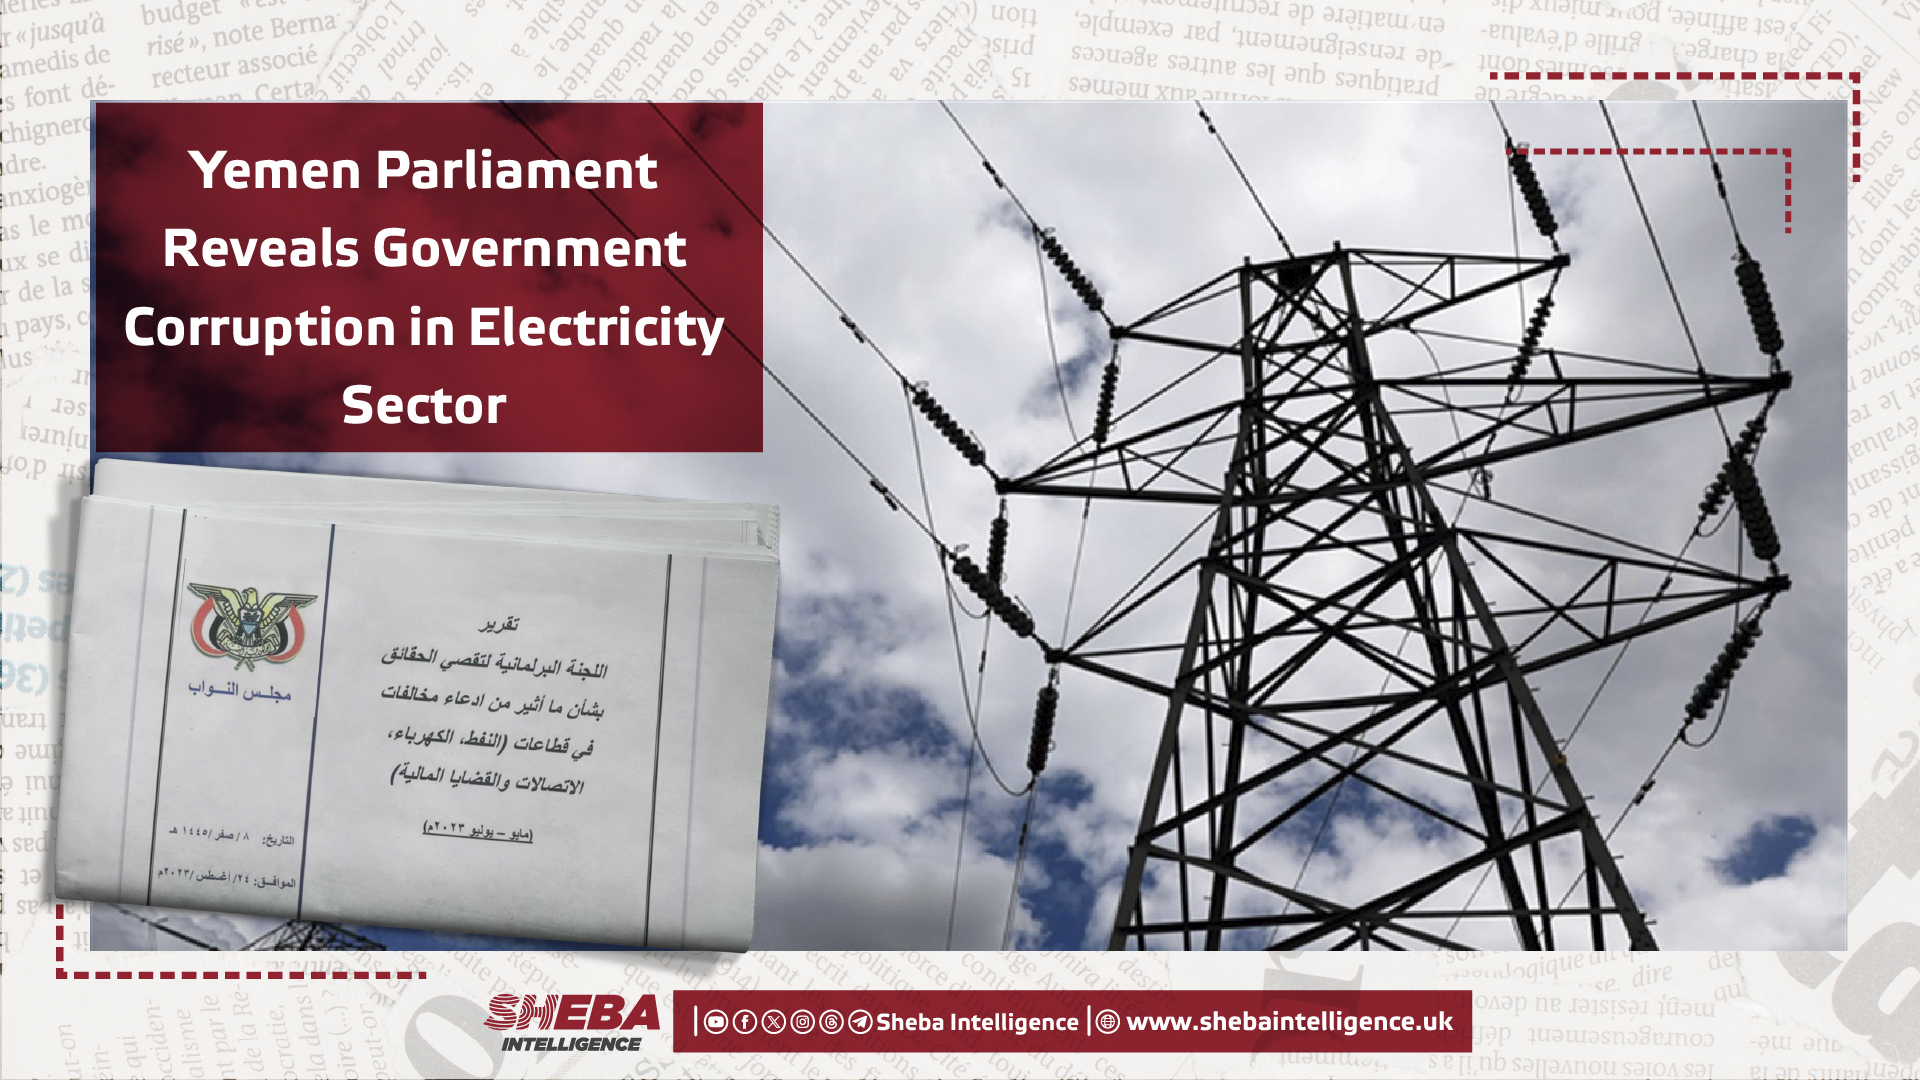 Yemen Parliament Reveals Government Corruption in Electricity Sector